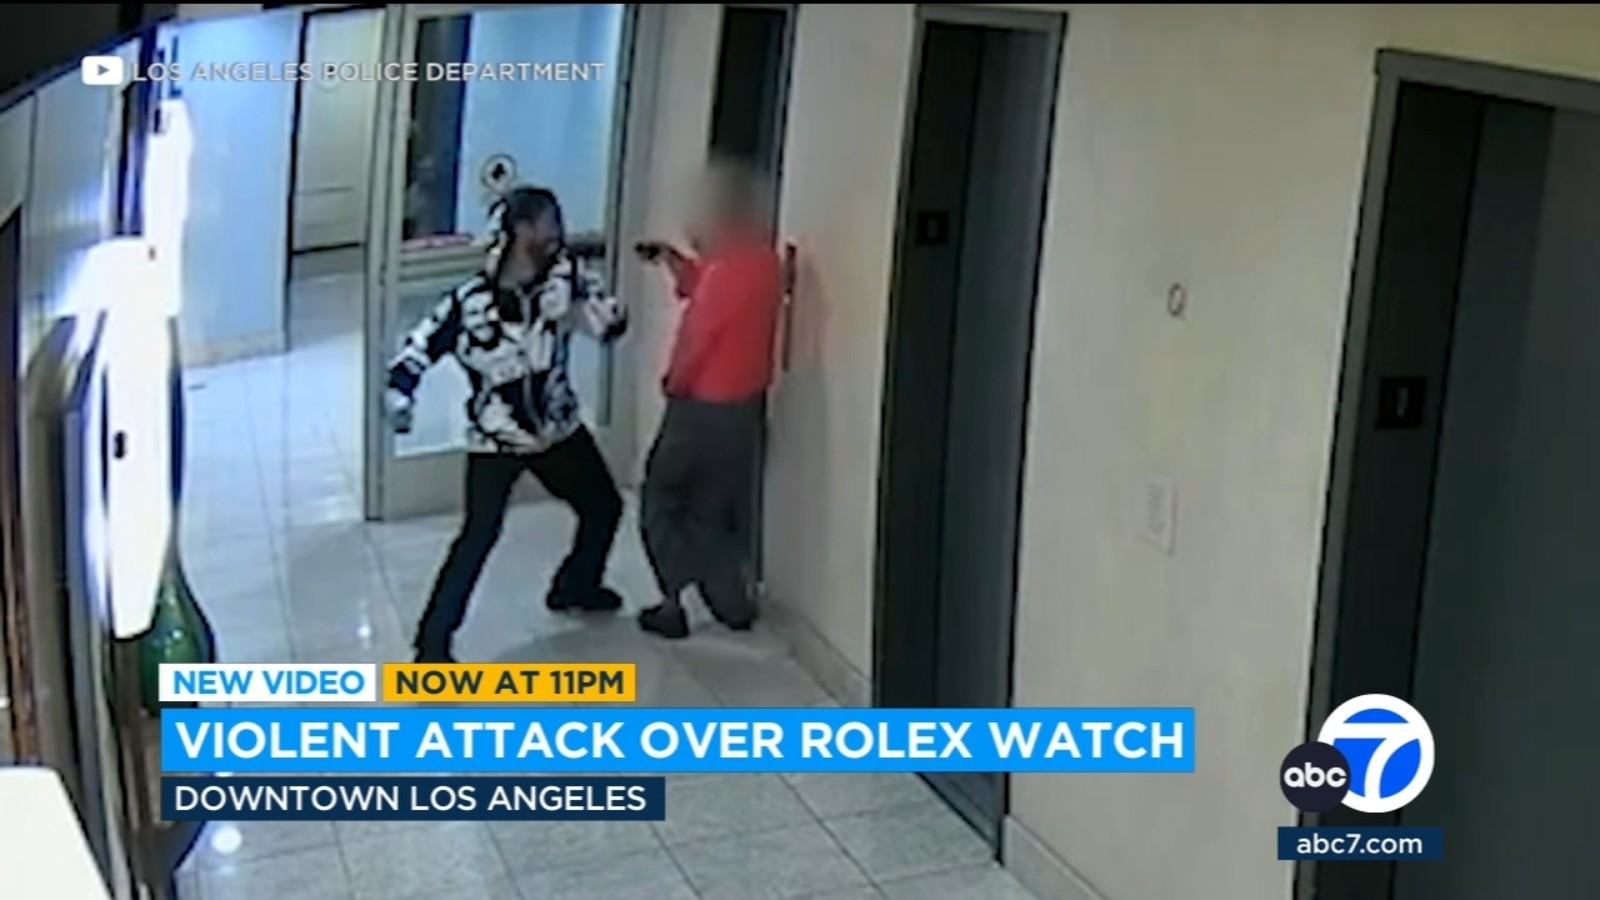 Suspect in violent DTLA Rolex watch robbery arrested; LAPD seeks other victims